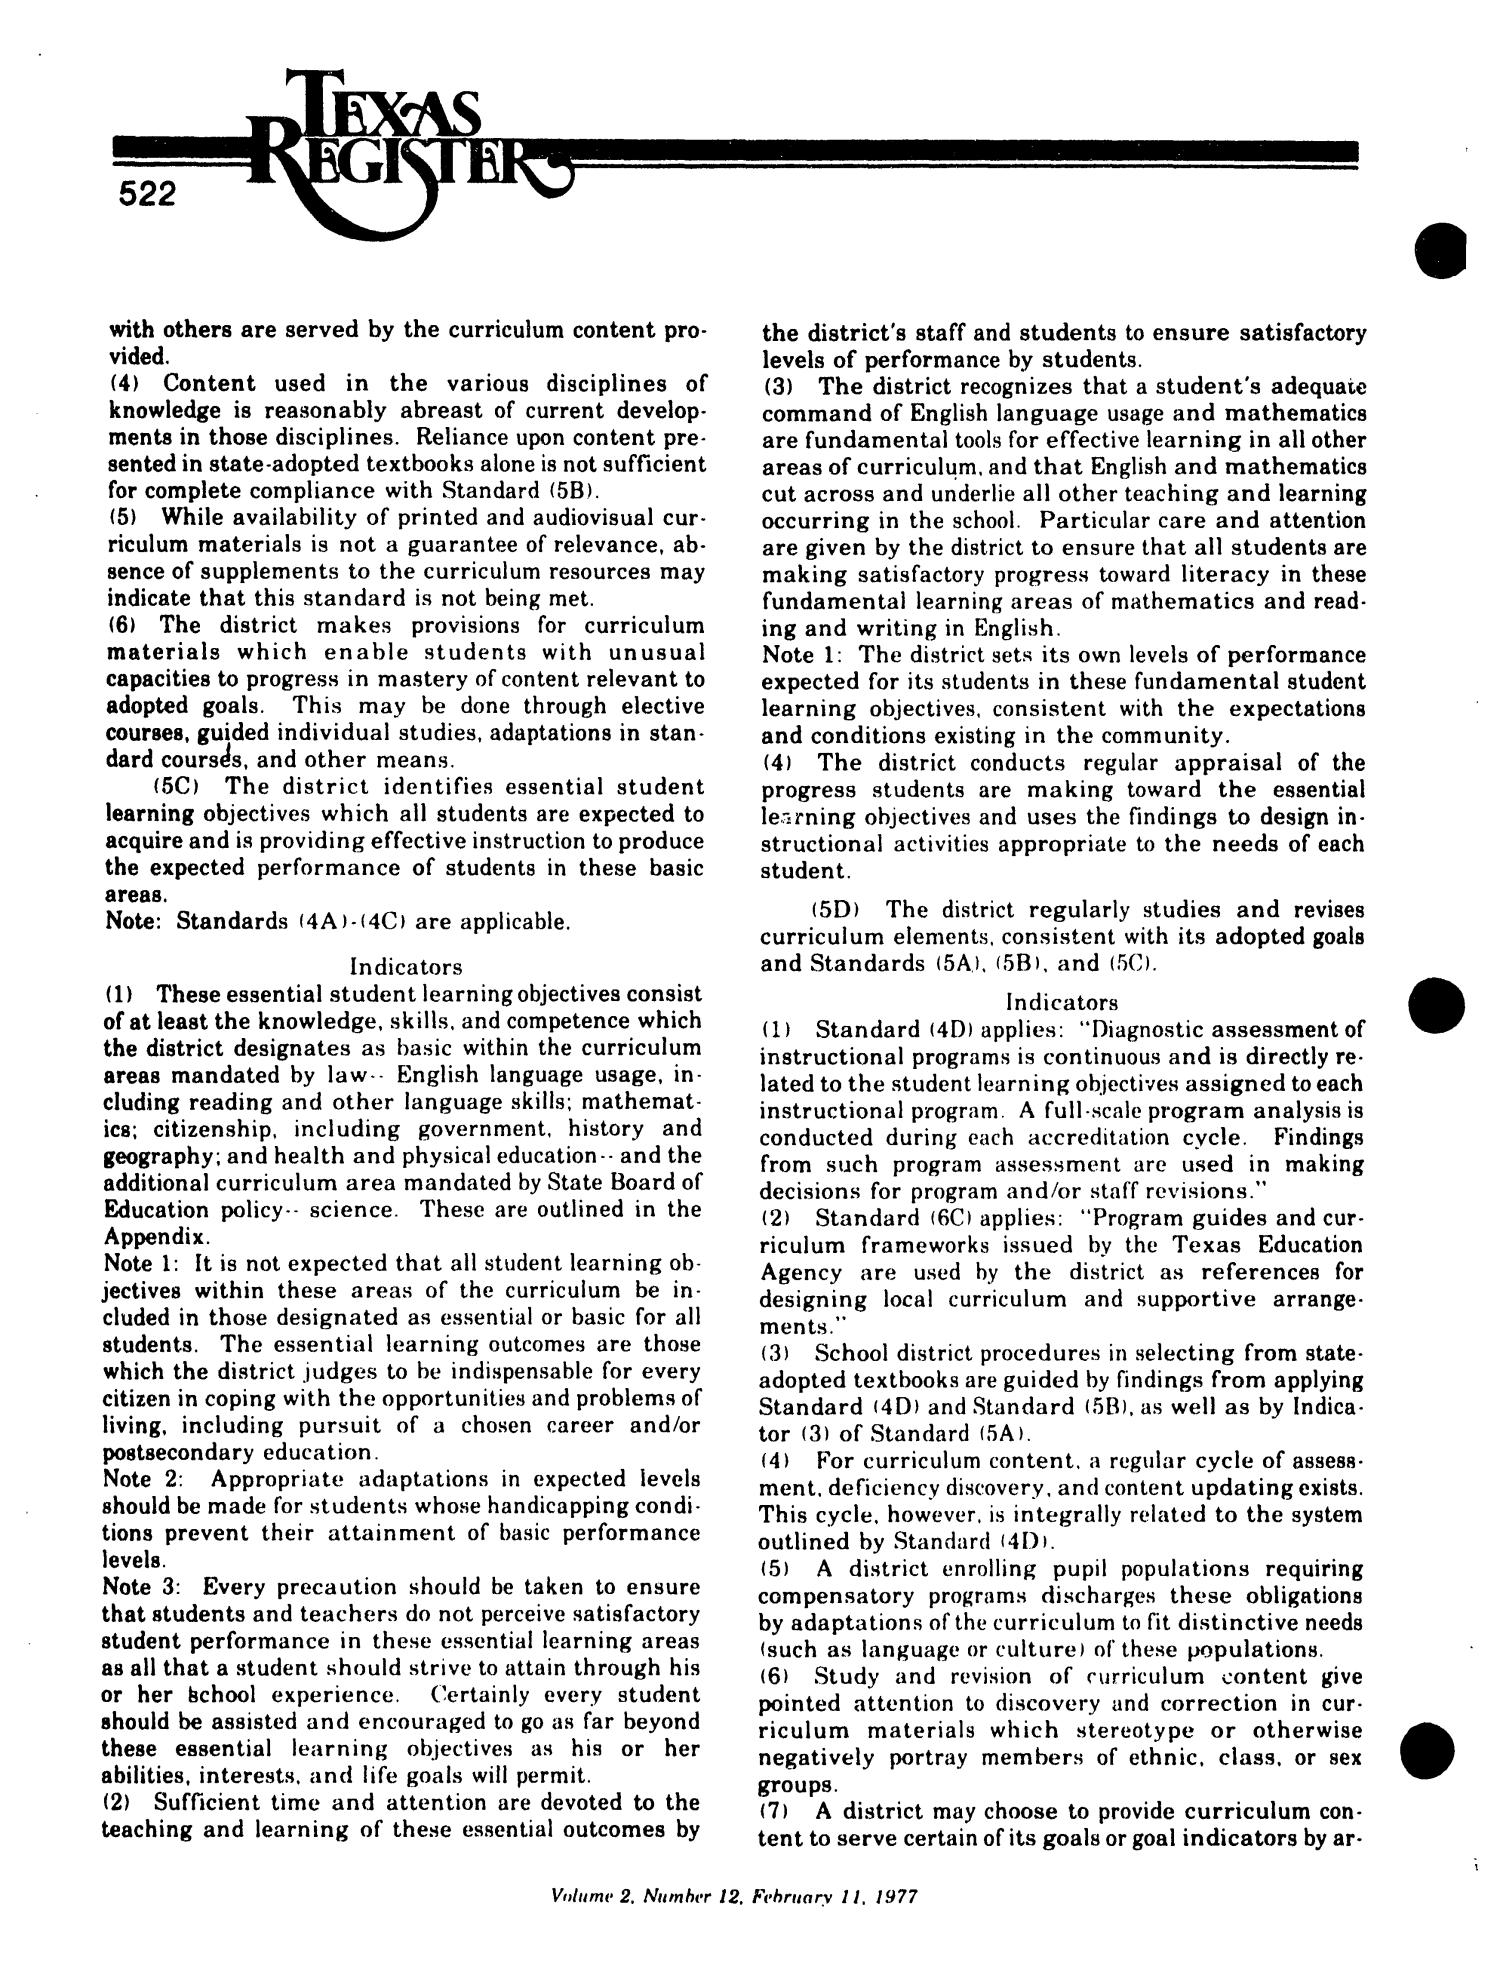 Texas Register, Volume 2, Number 12, Pages 507-562, February 11, 1977
                                                
                                                    522
                                                